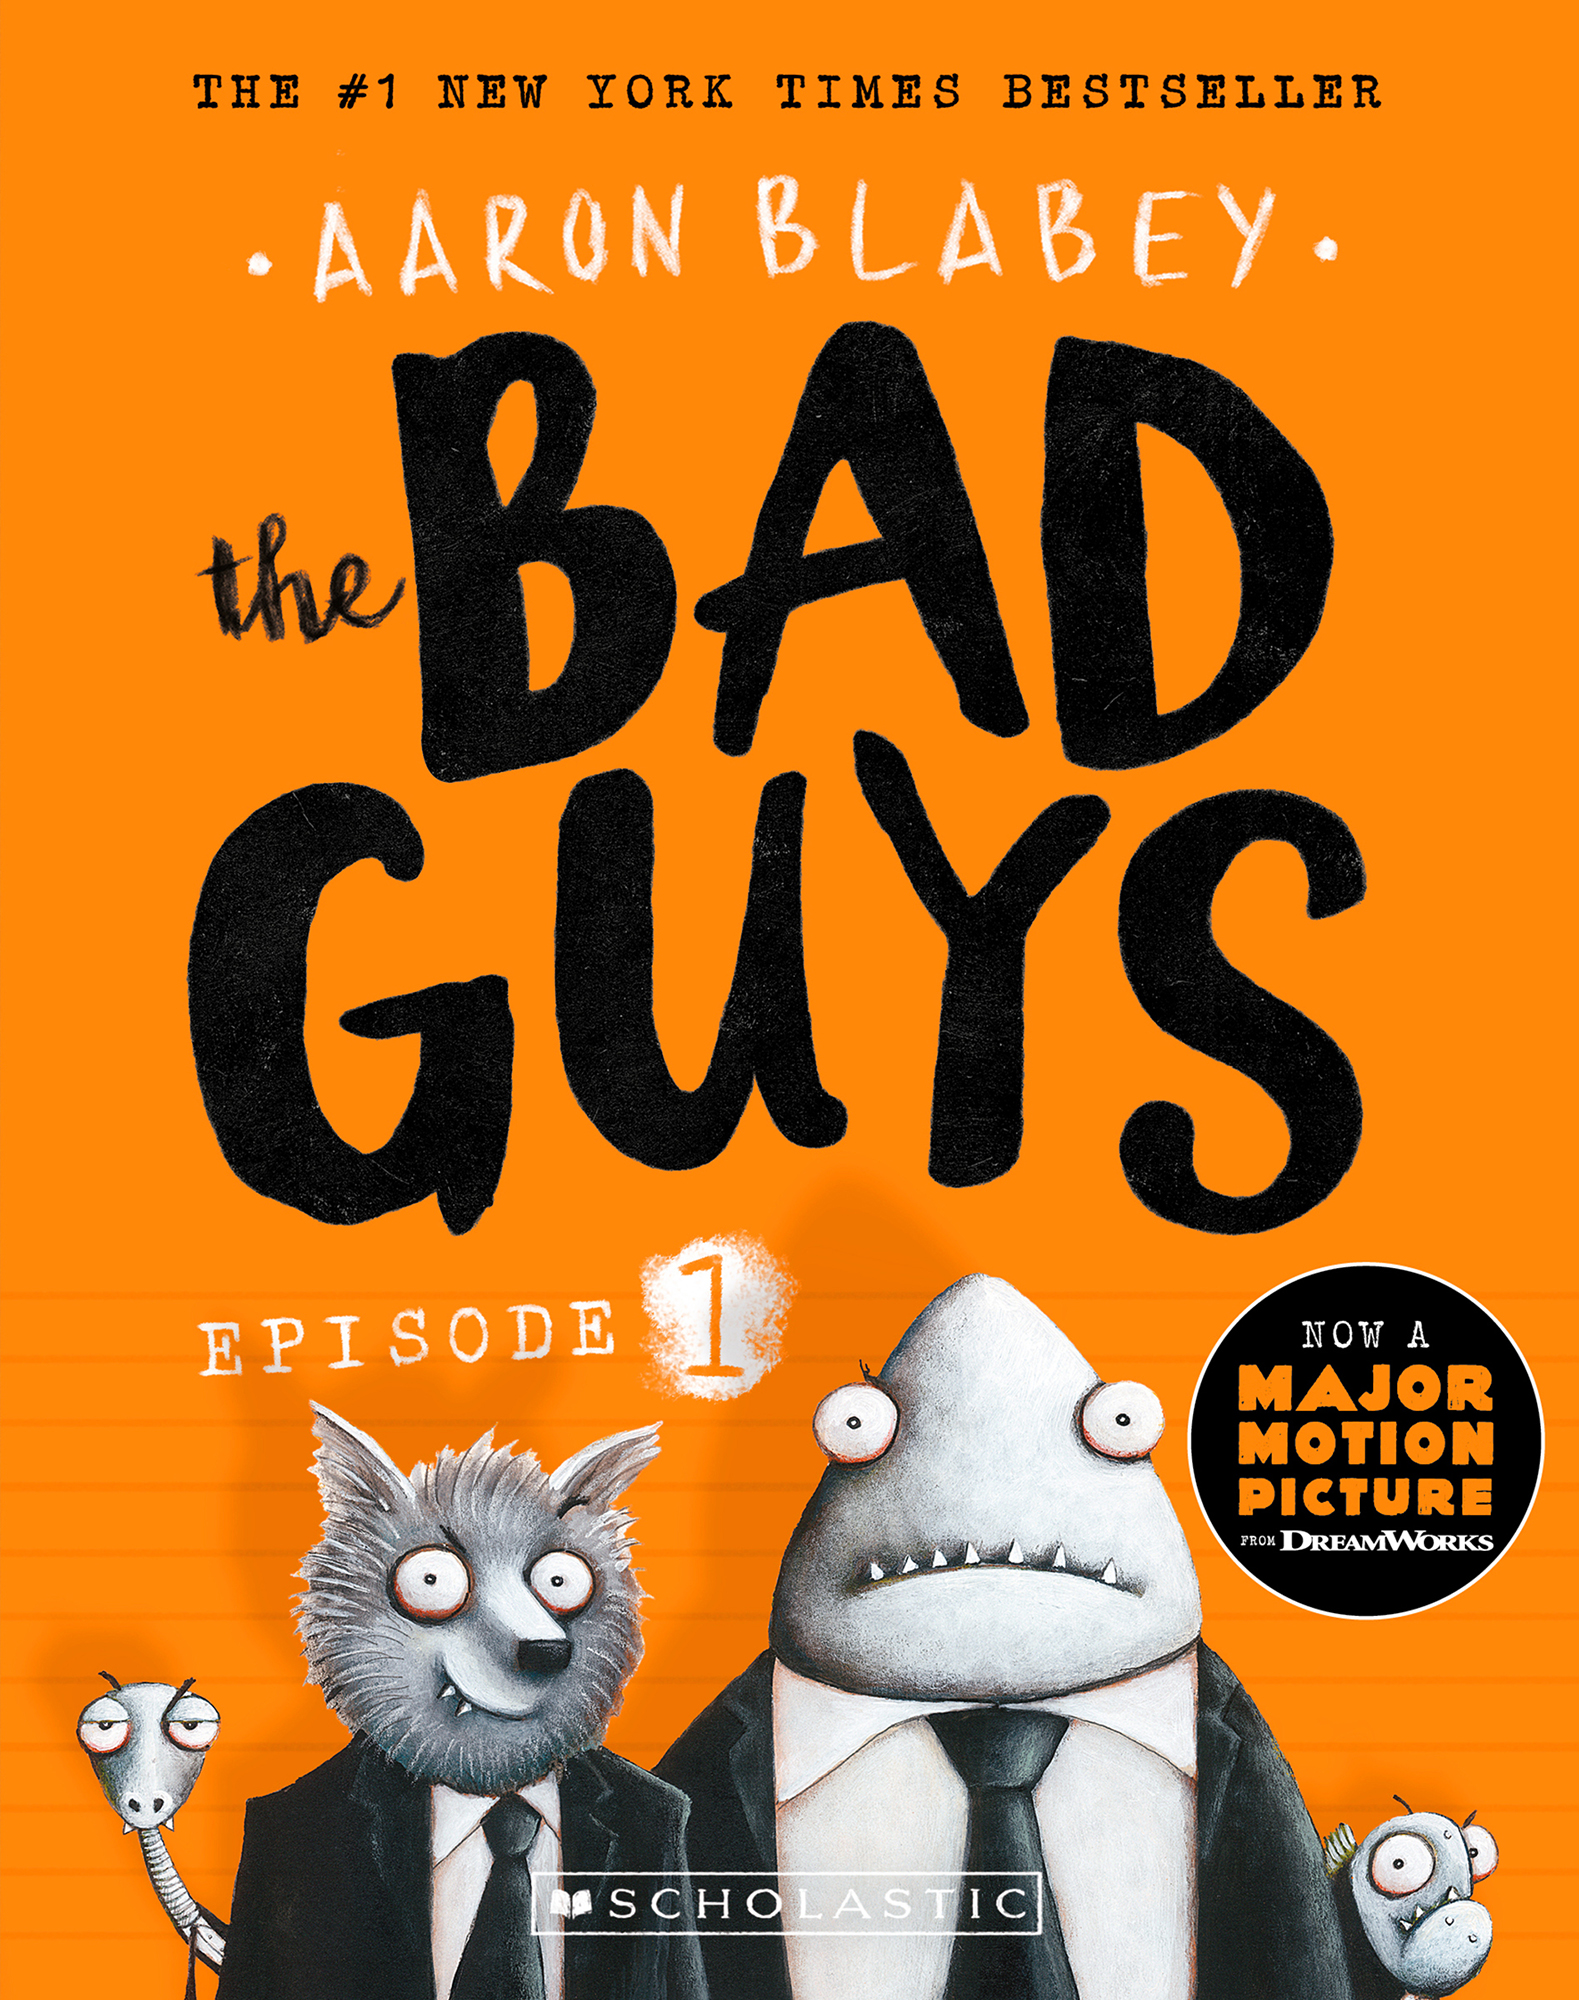 Black and orange book cover of children's book The Bad Guys by Aaron Blabey featuring a cartoon spider, wolf, shark and piranha